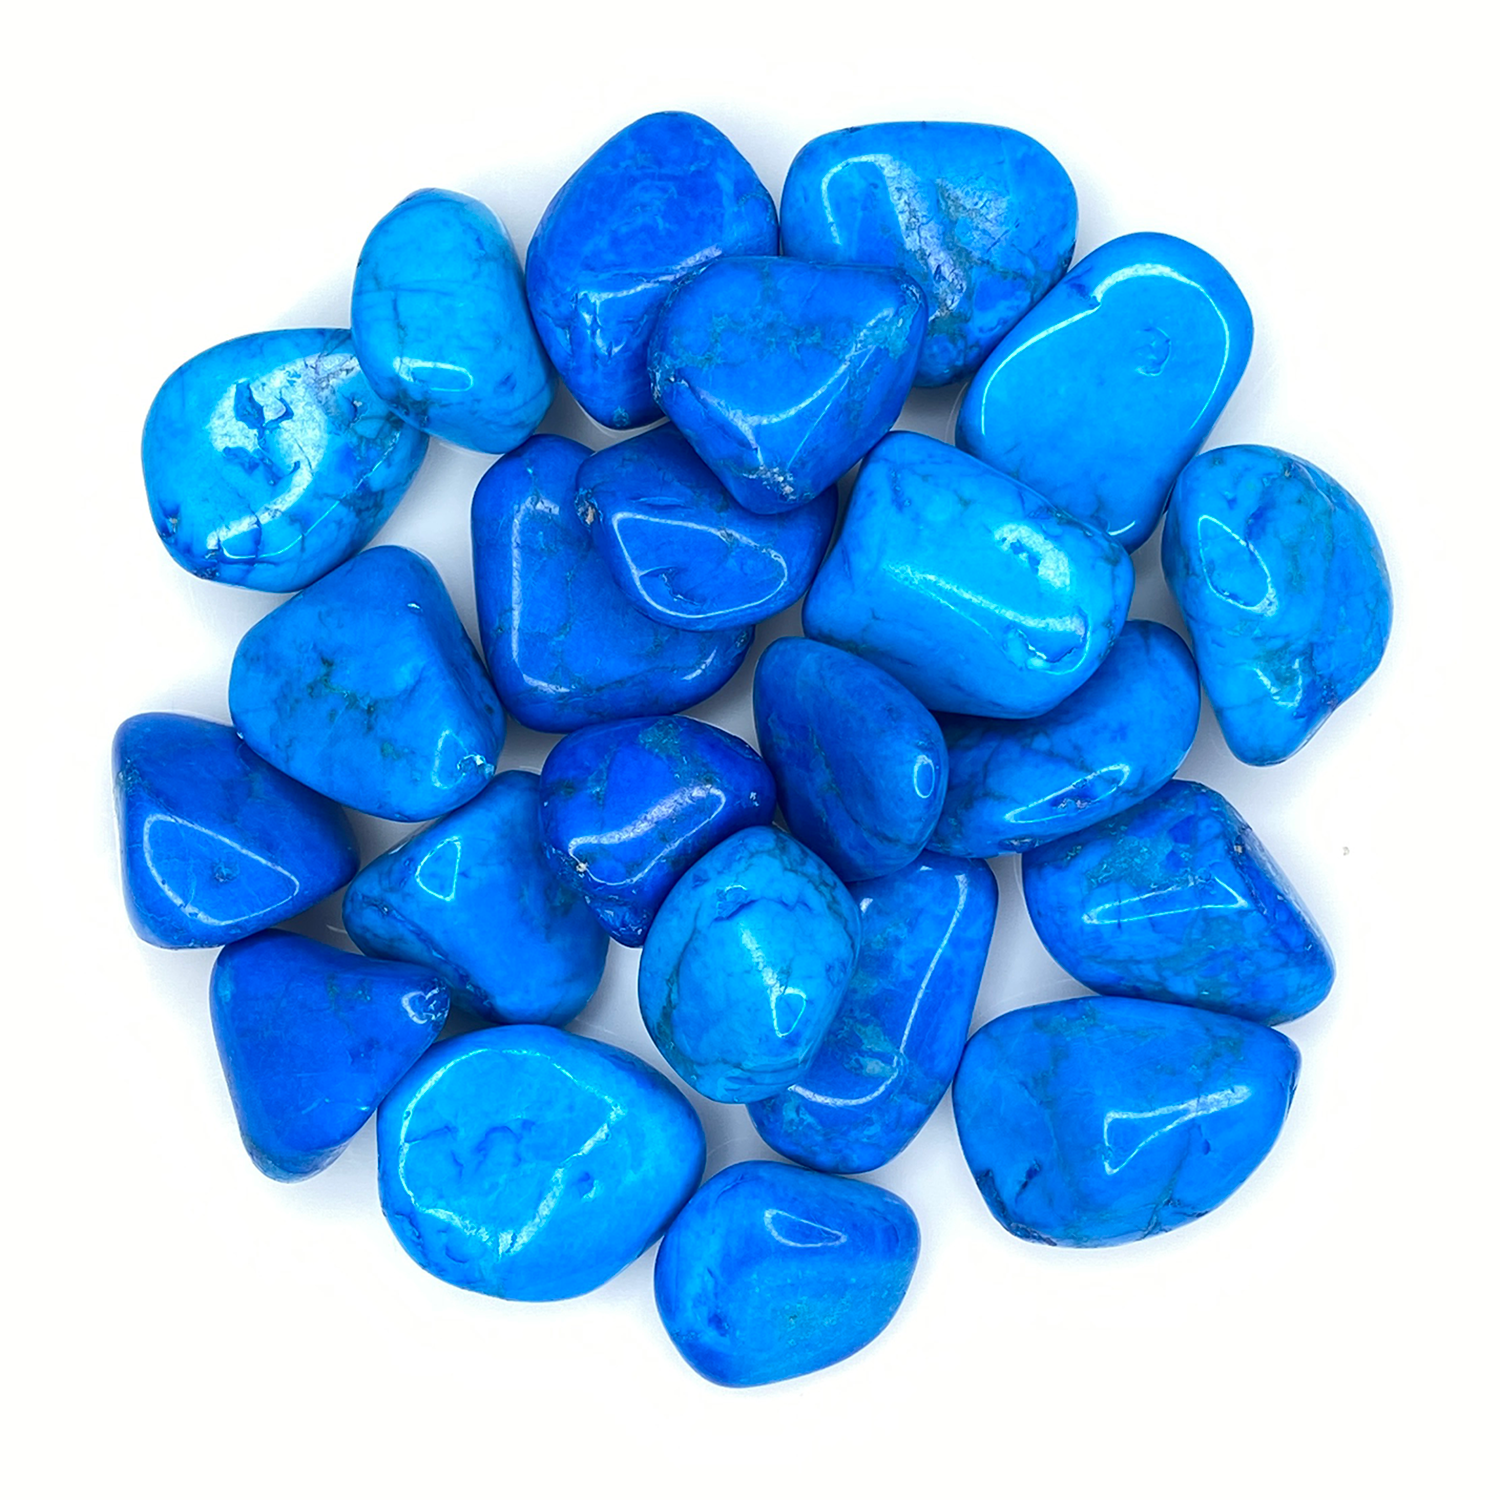 Bulk Tumbled Stone - Large - Blue Howlite from South Africa